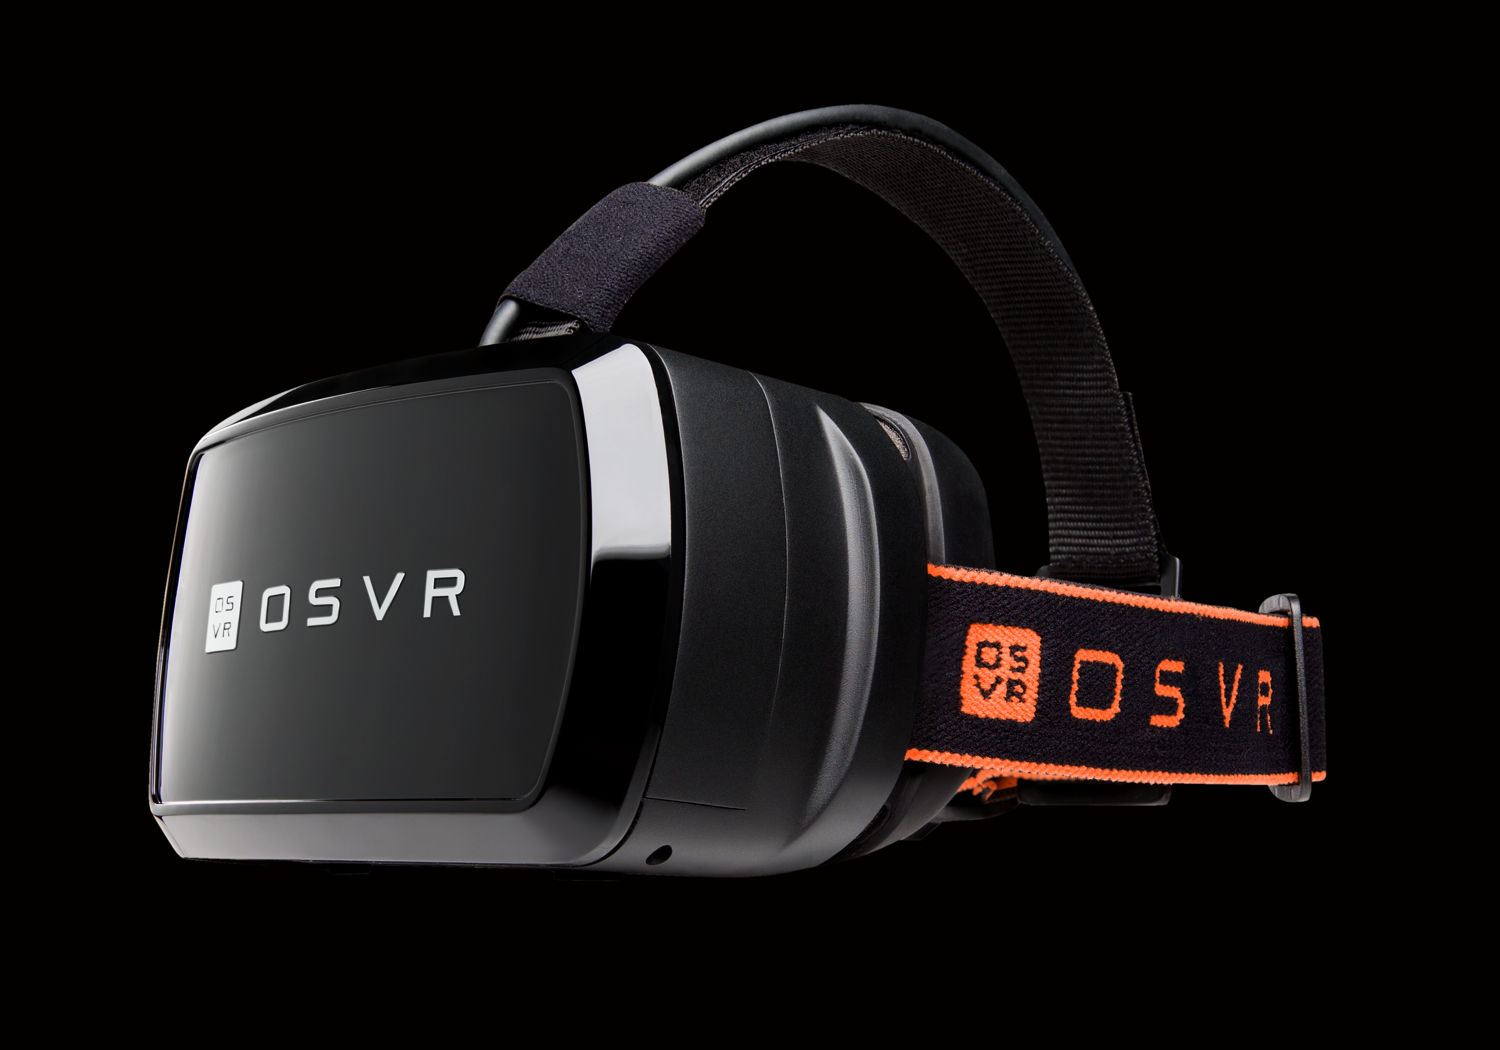 Image for Razer announces new VR headset and Forge TV at CES 2015 